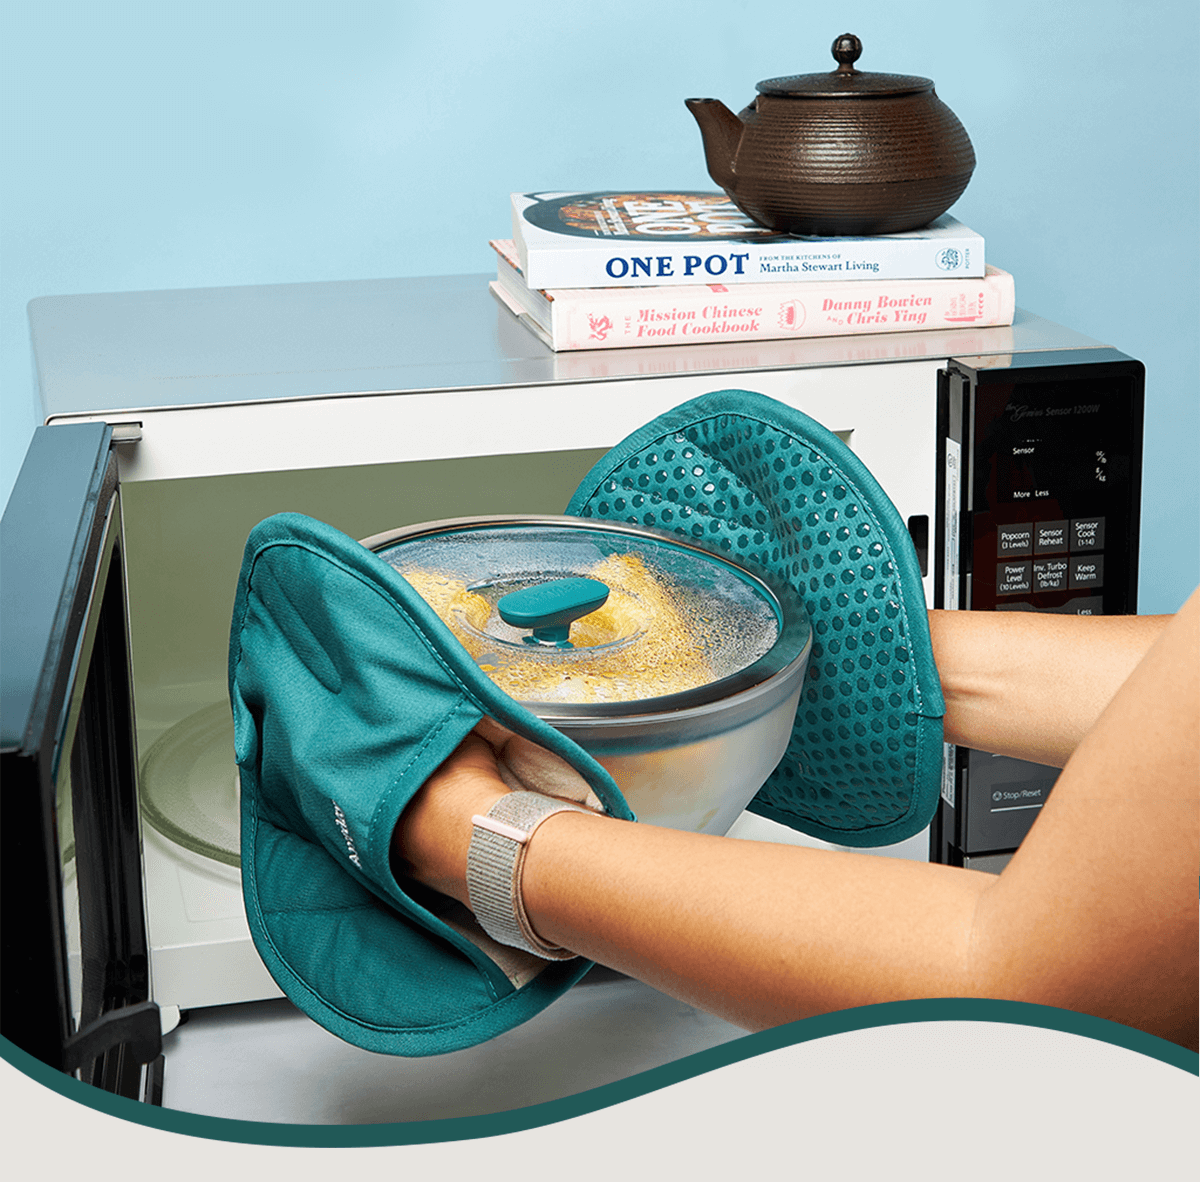 Microware cooking